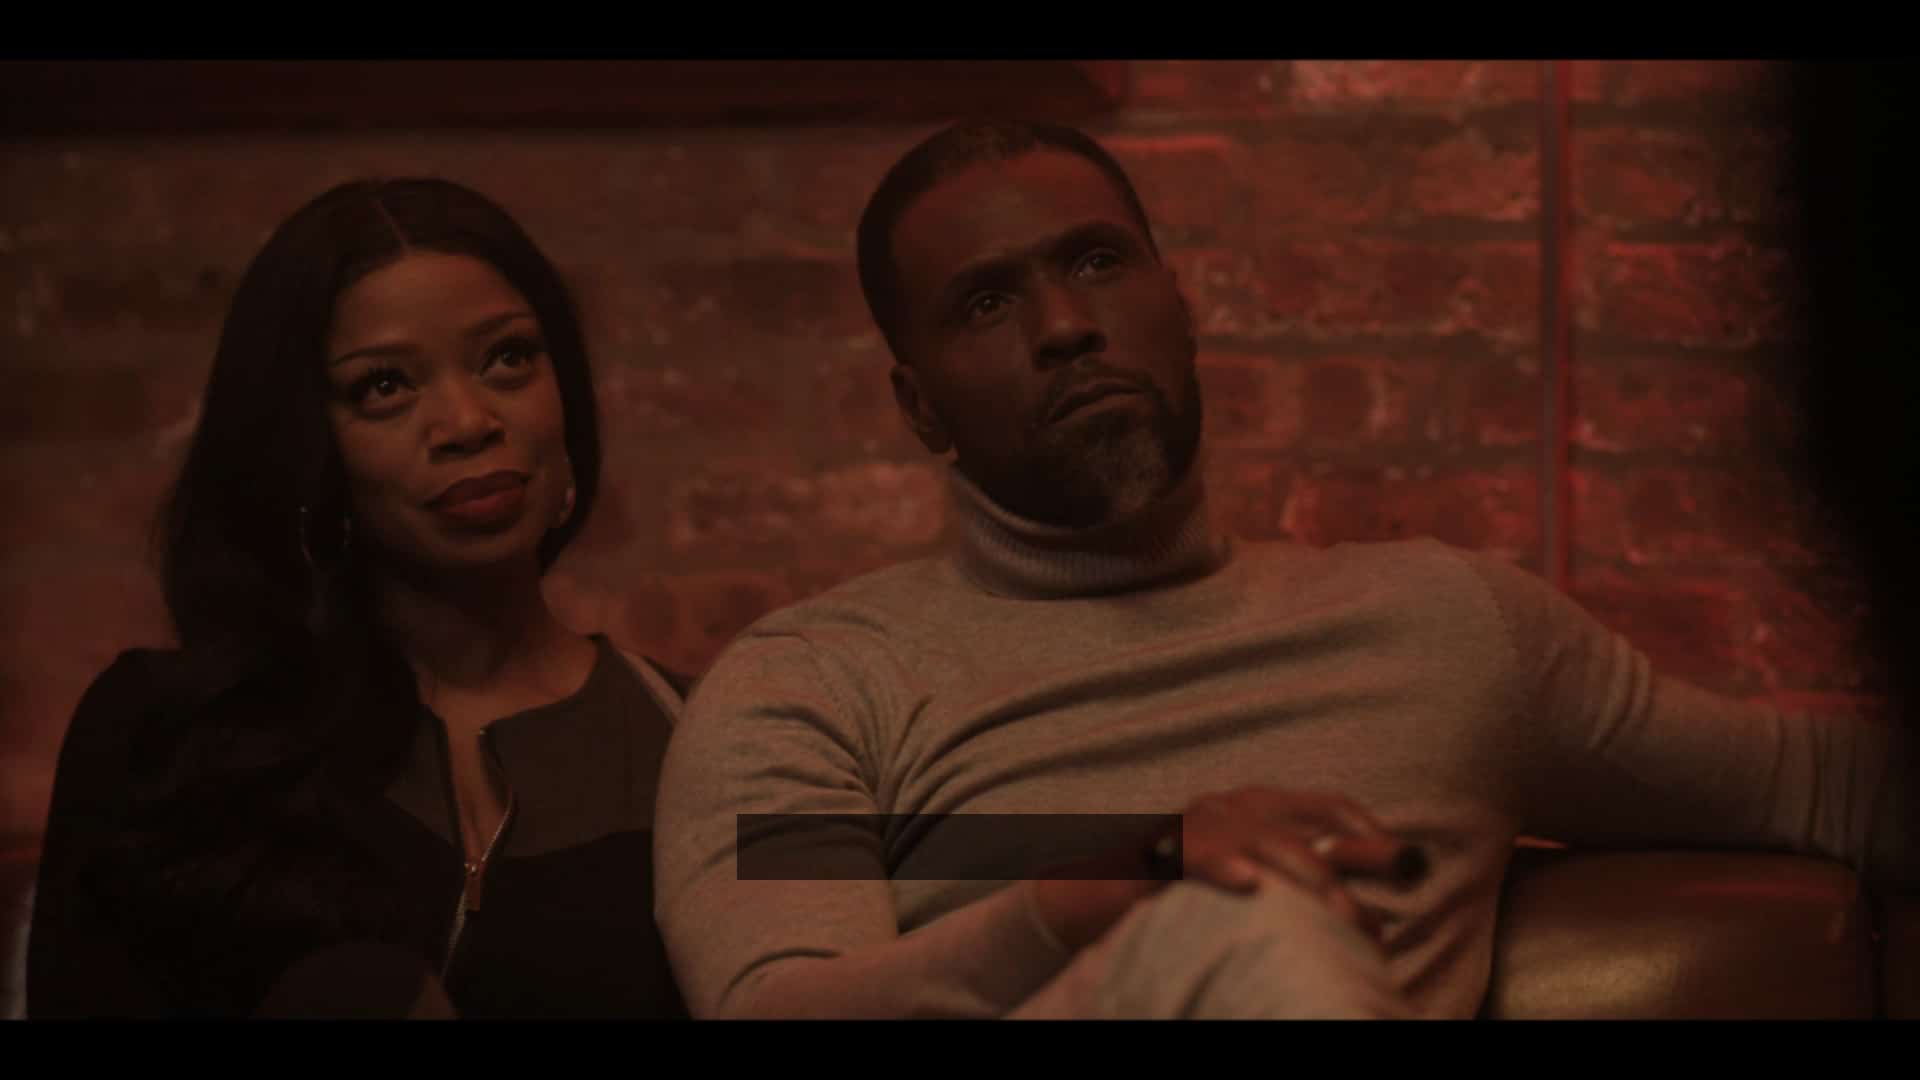 Bianca (Jill Marie Jones) and Douda (Curtiss Cook) sitting together